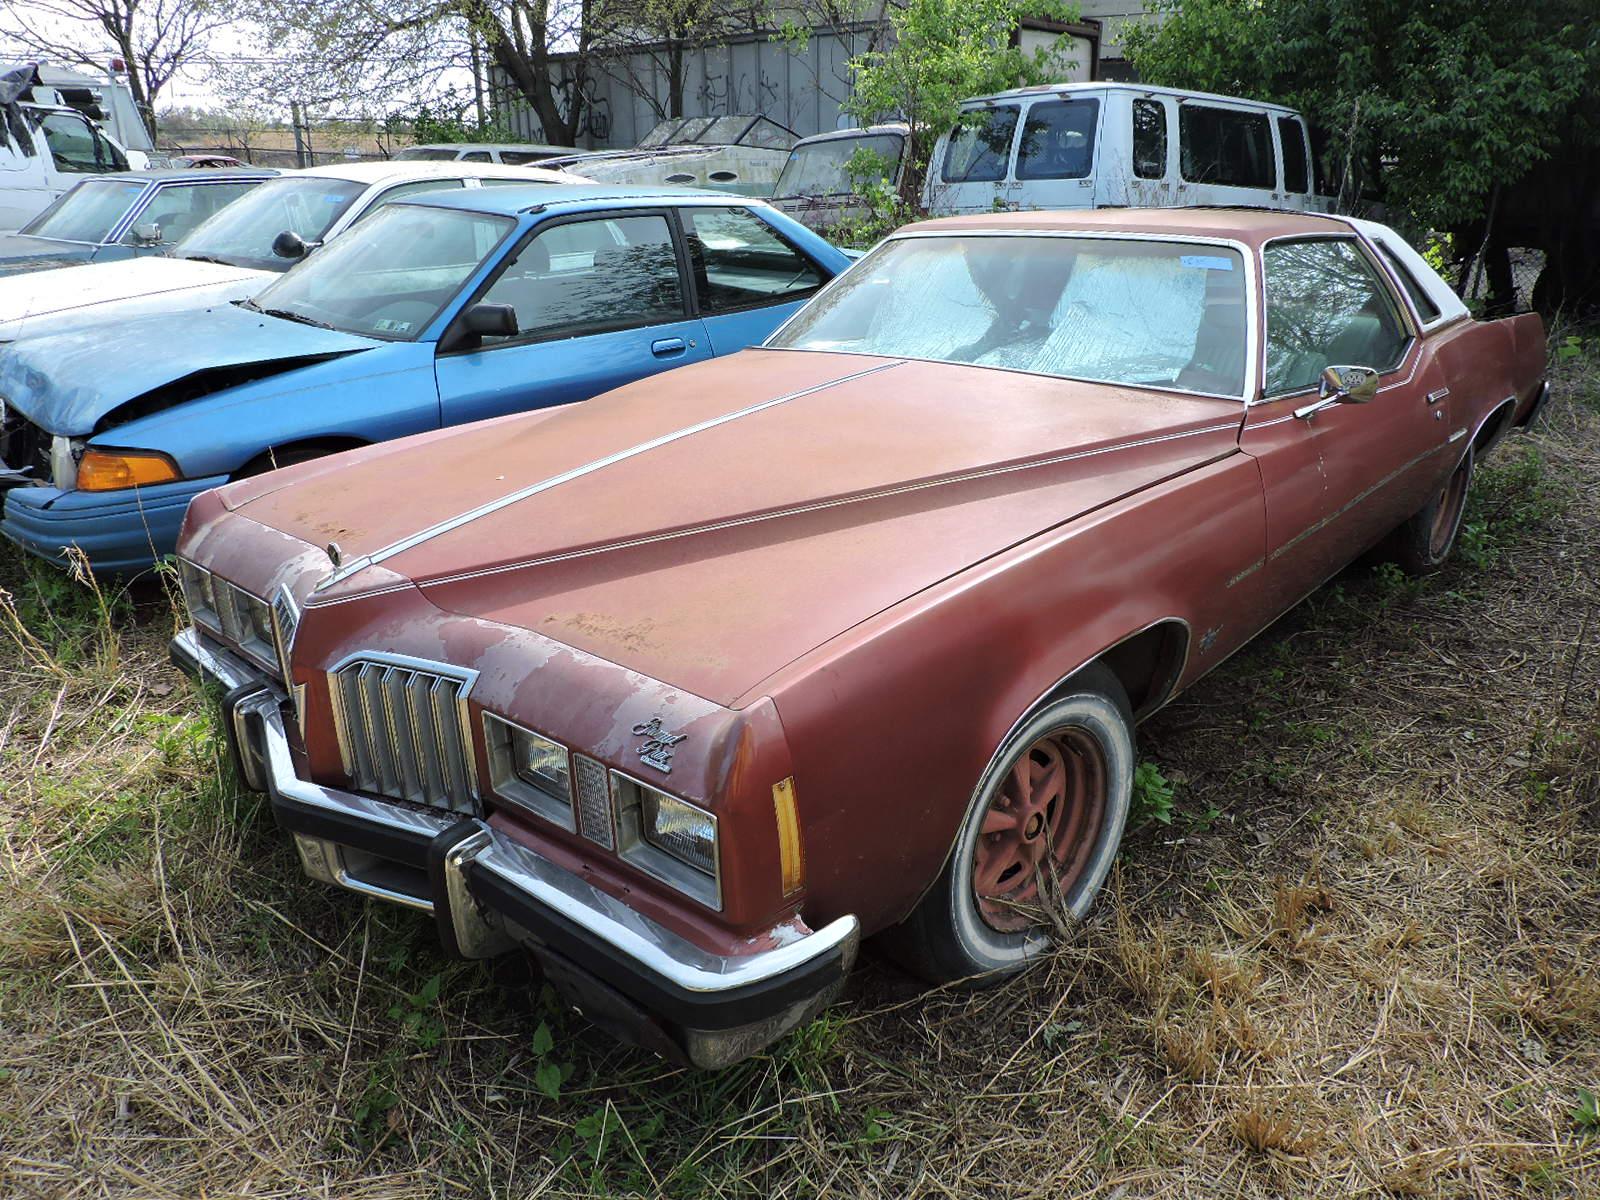 1977 Pontiac Grand Prix Coupe SJ - Power Features - Only 69K Miles